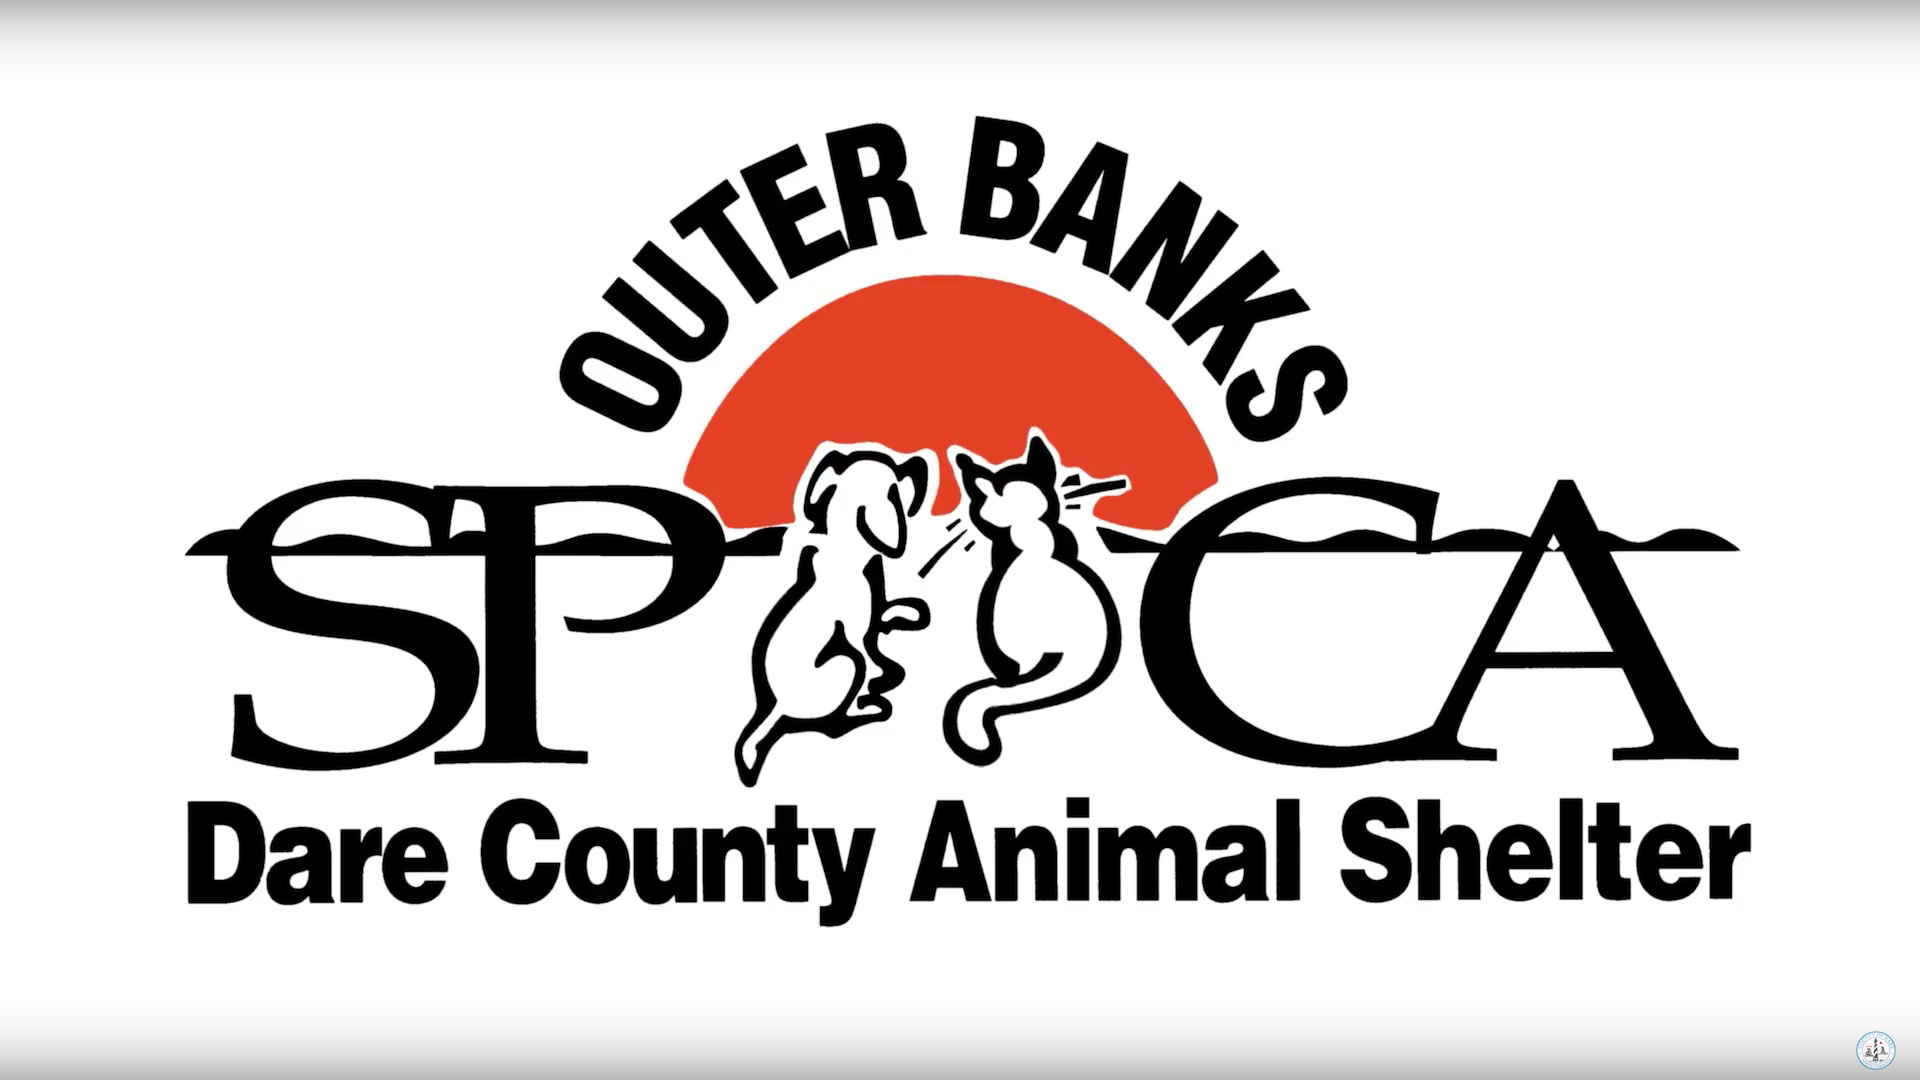 Nominee Outer Banks SPCA